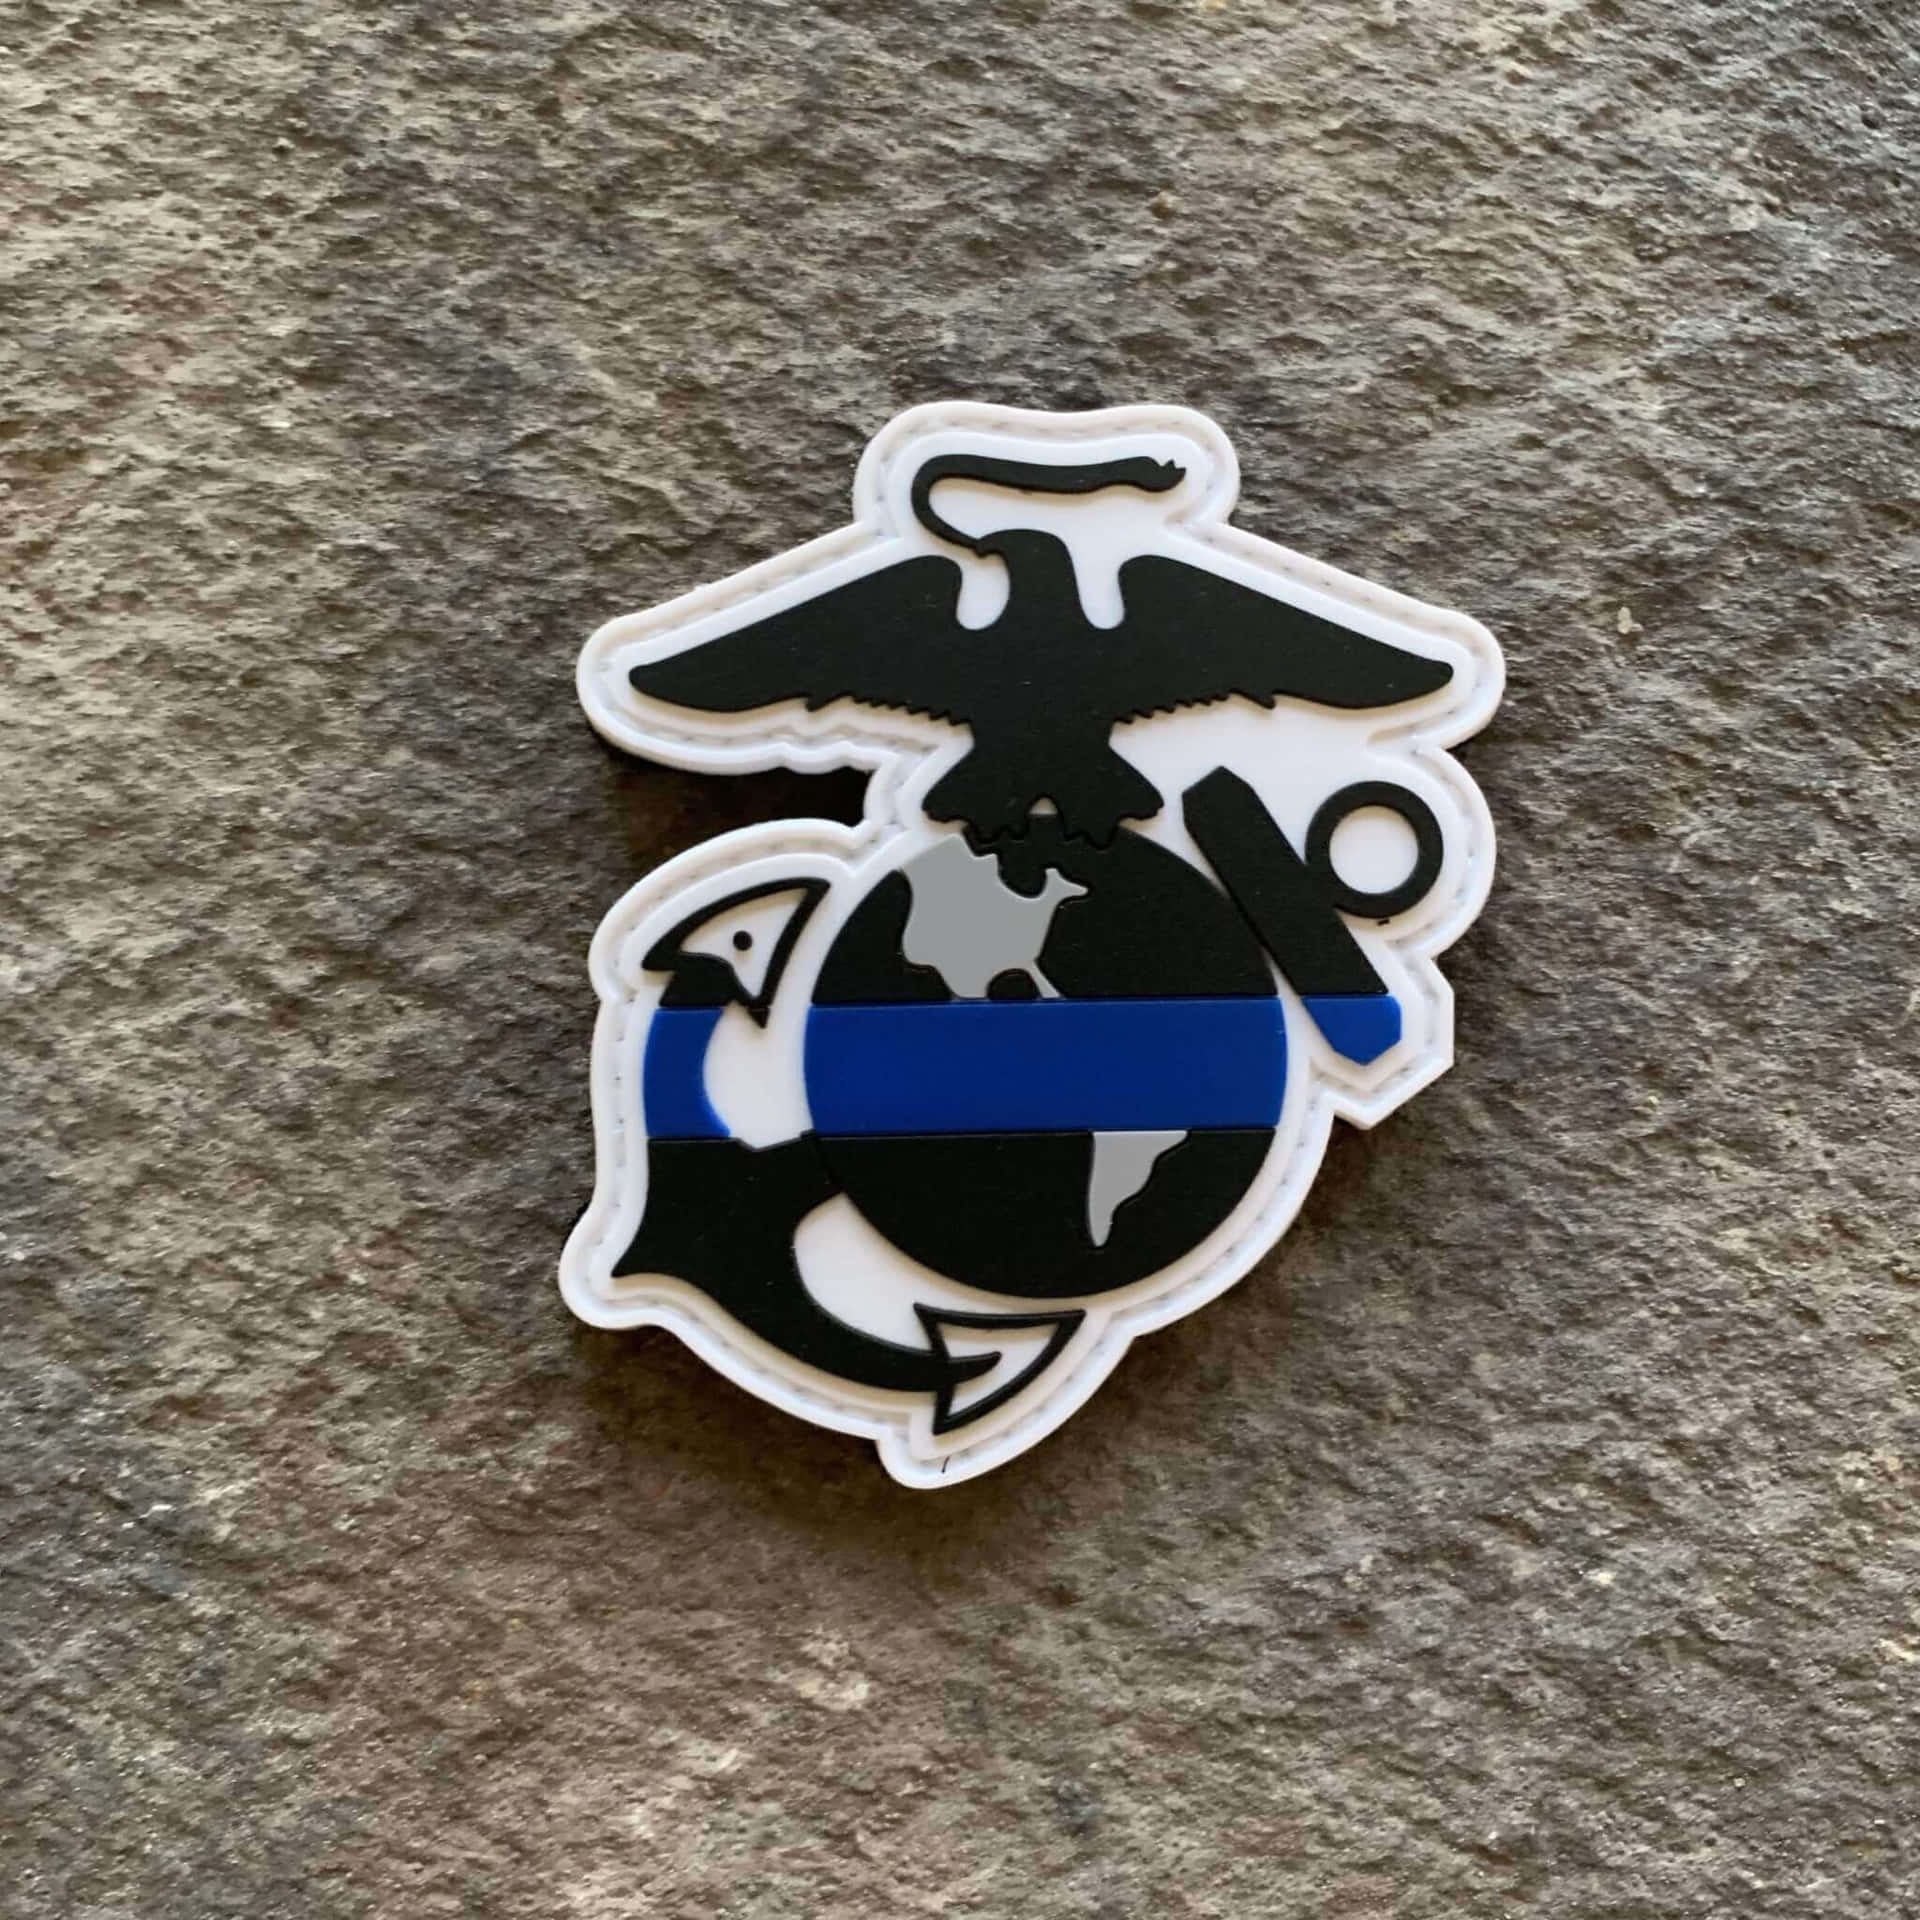 A dramatic Thin Blue Line background symbolizing support for law enforcement